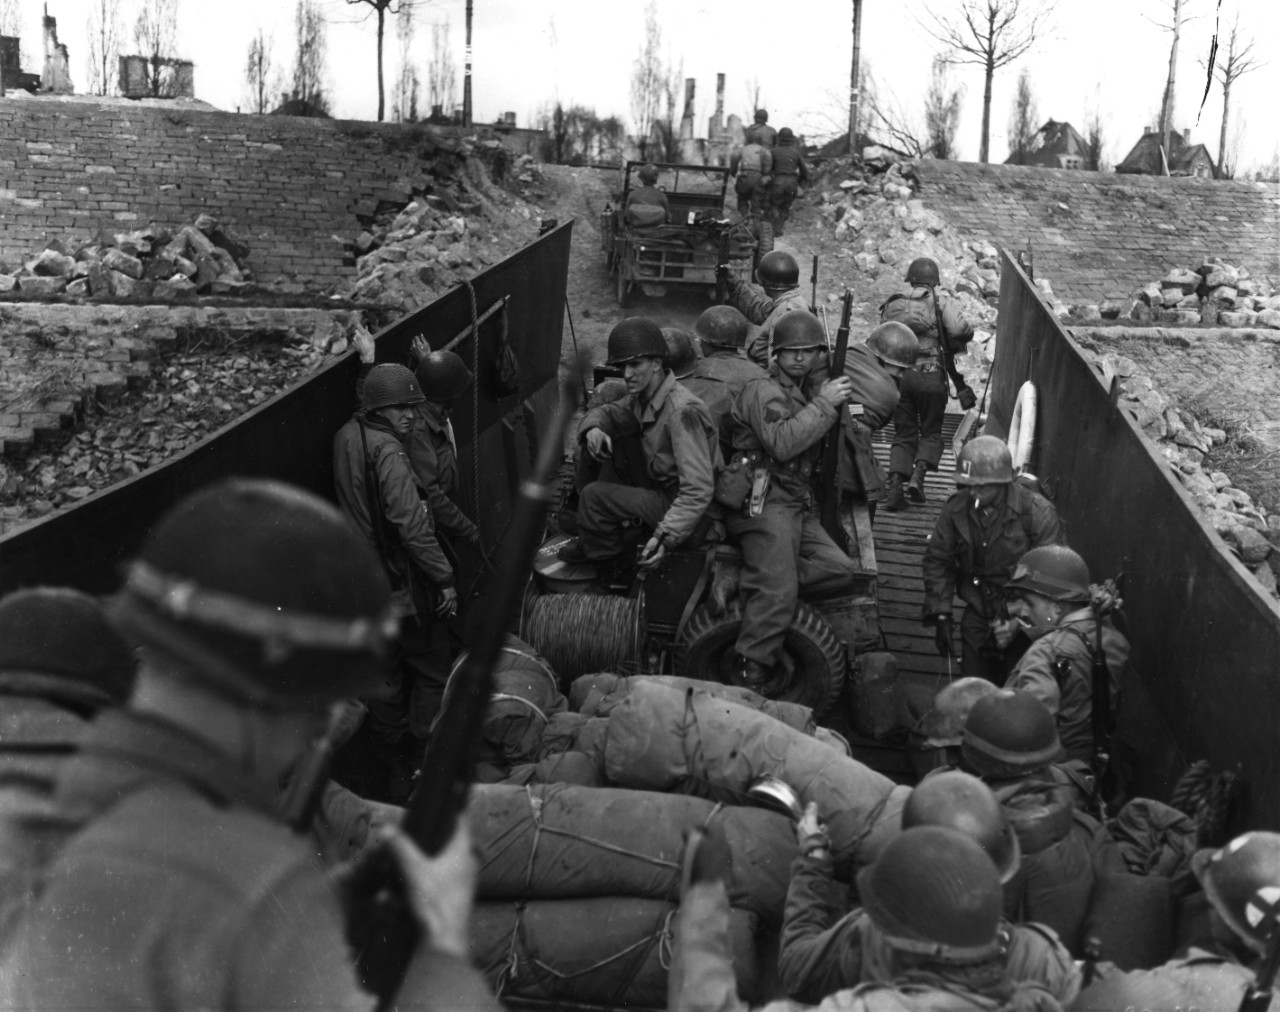 <p>Men and vehicles of the 80th Infantry Division, Third US Army, load into a landing craft prior to crossing the Rhine River, Germany, 29 March 1945. Note M-1 Garand rifle and belt gear of man in center, including TL-29 knife, and M-1 carbines carried by other men.</p>
